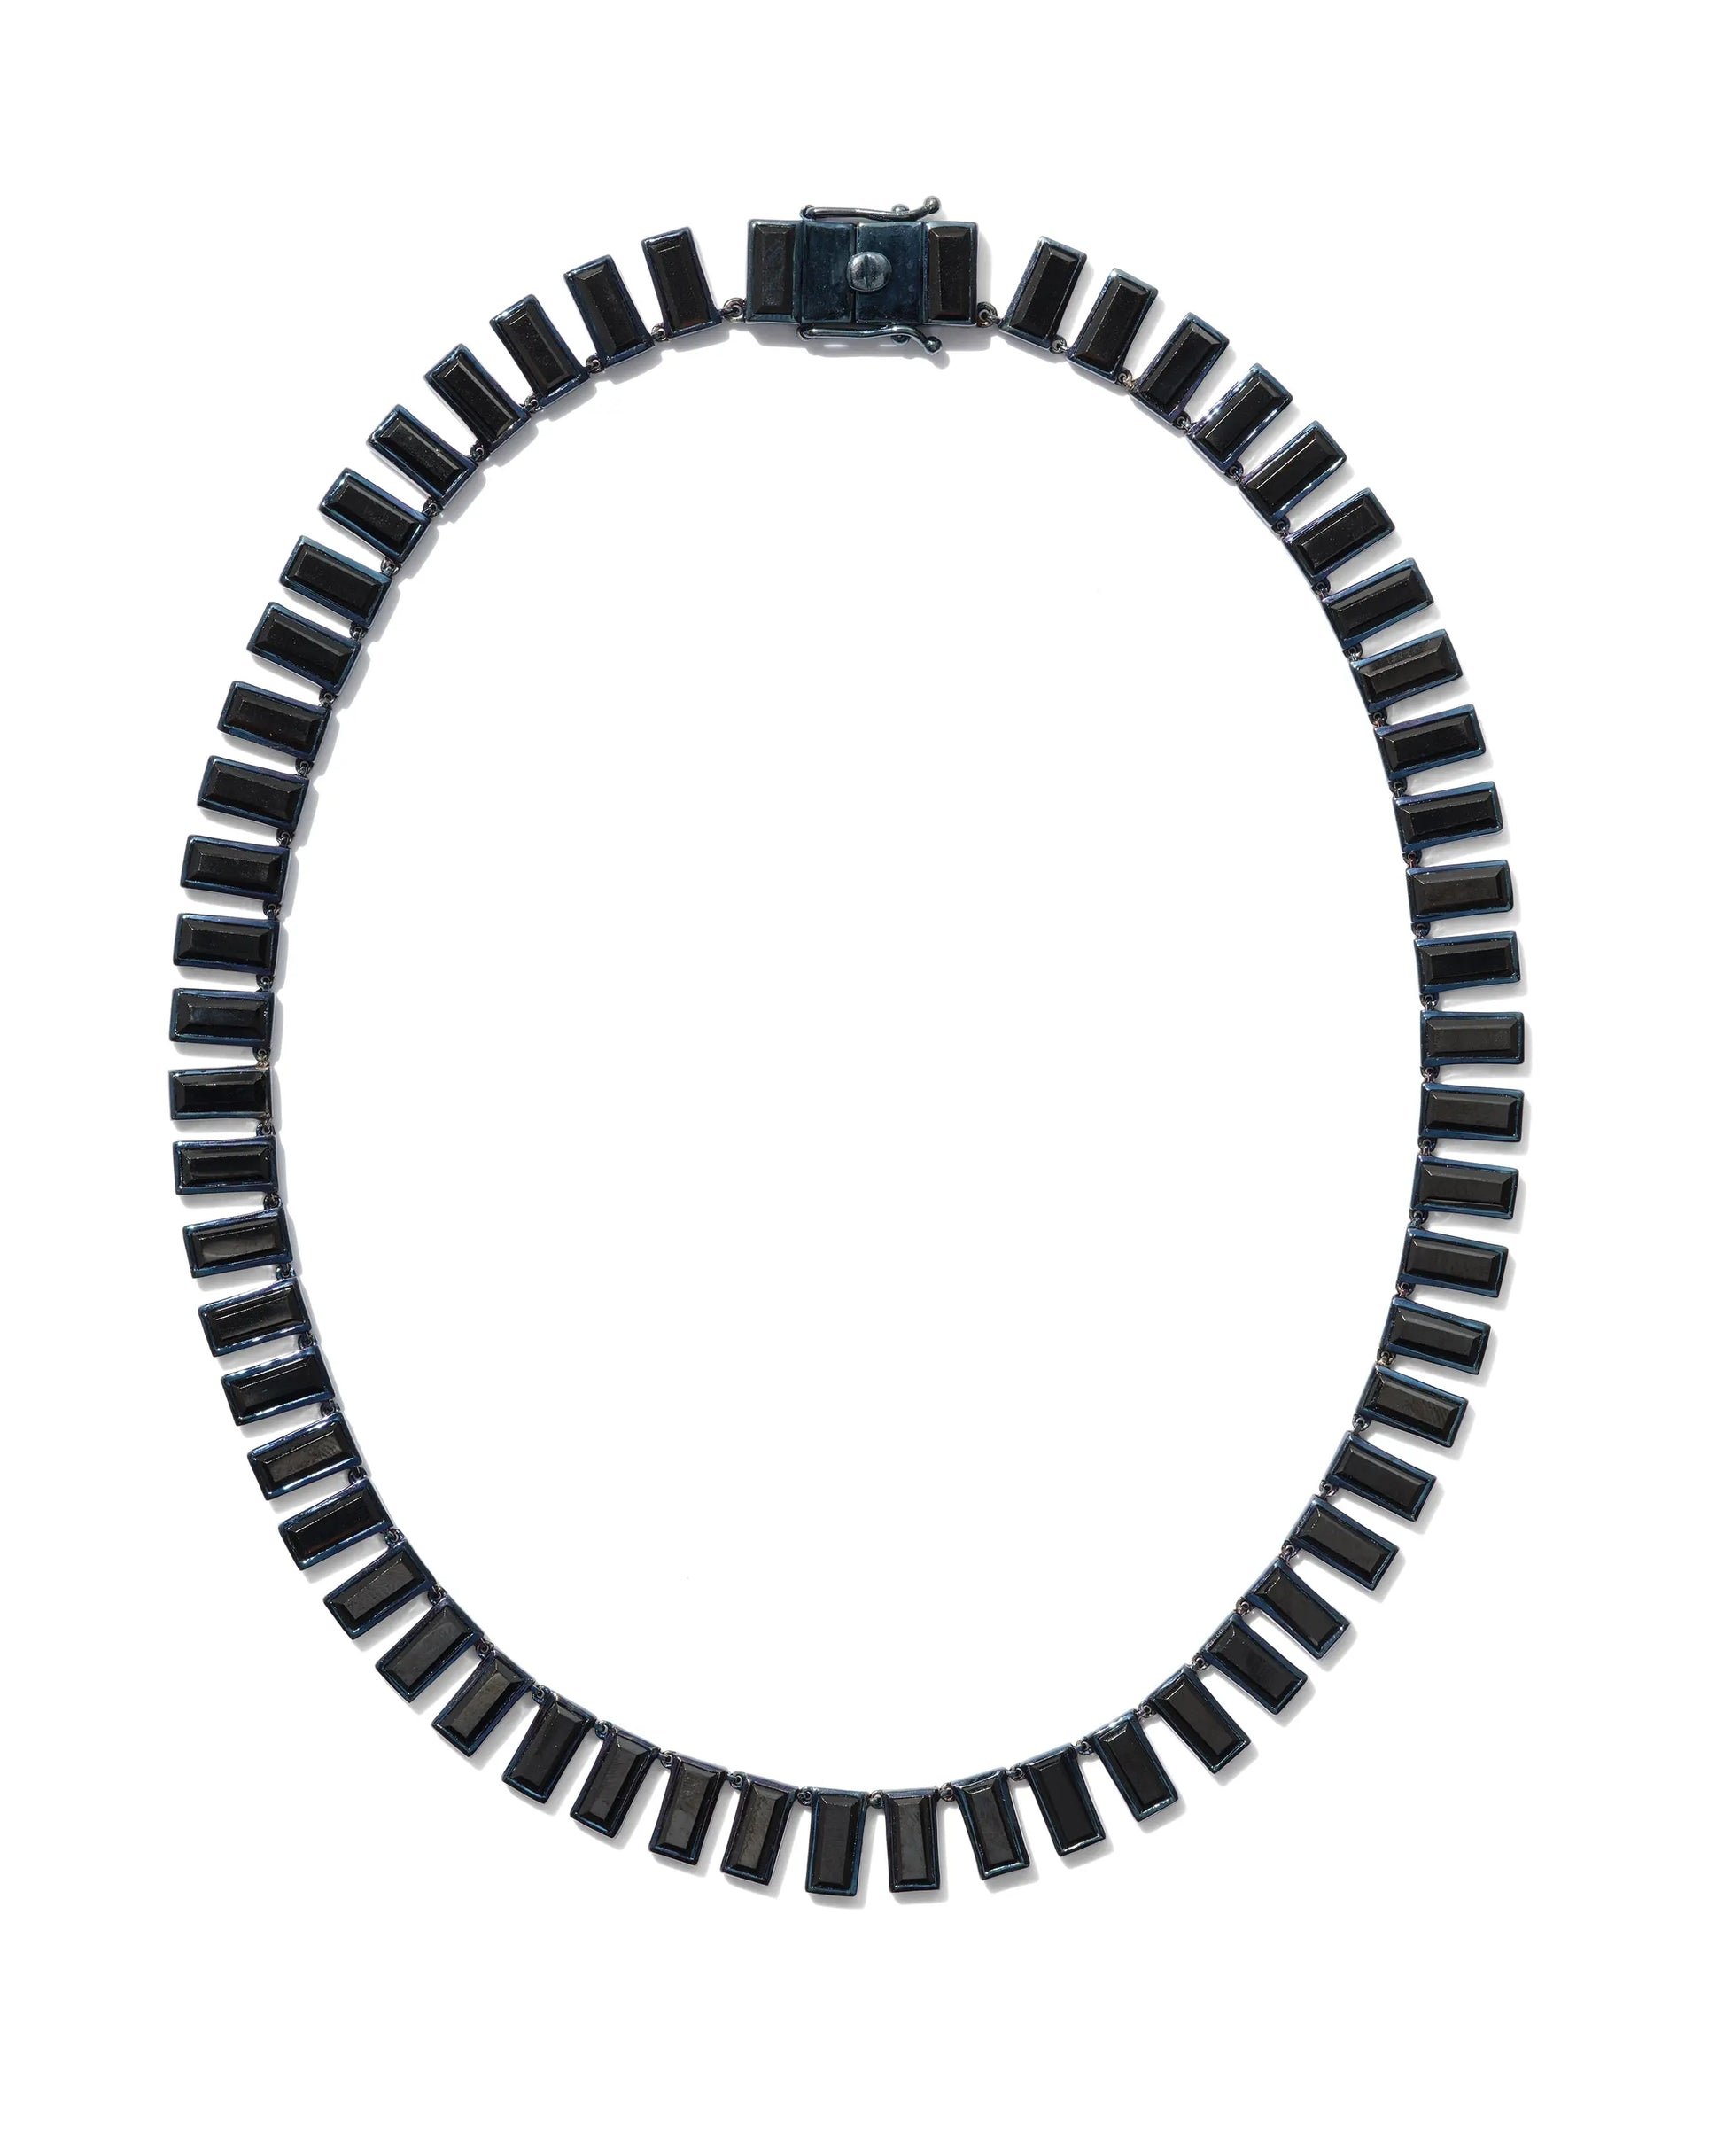 Designed by Nak Armstrong this necklace is great on its own or layered.  They are set in sterling silver with blue rhoduim and baguette black spinel 9 mm. The necklace measure 16 in length.